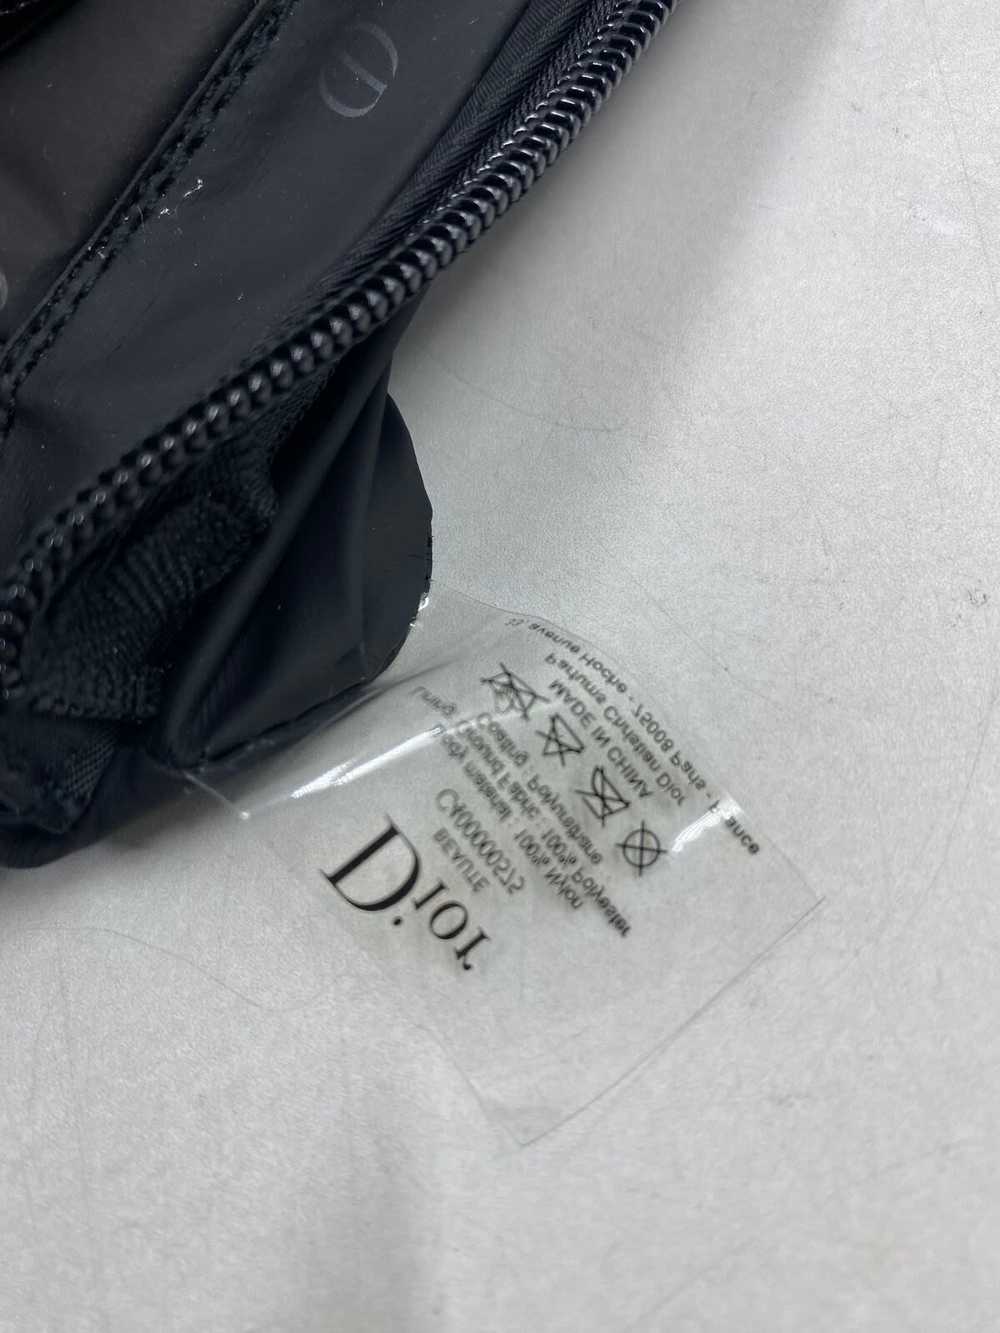 Authentic DIOR Beauty Black Toiletry Travel Case - image 7